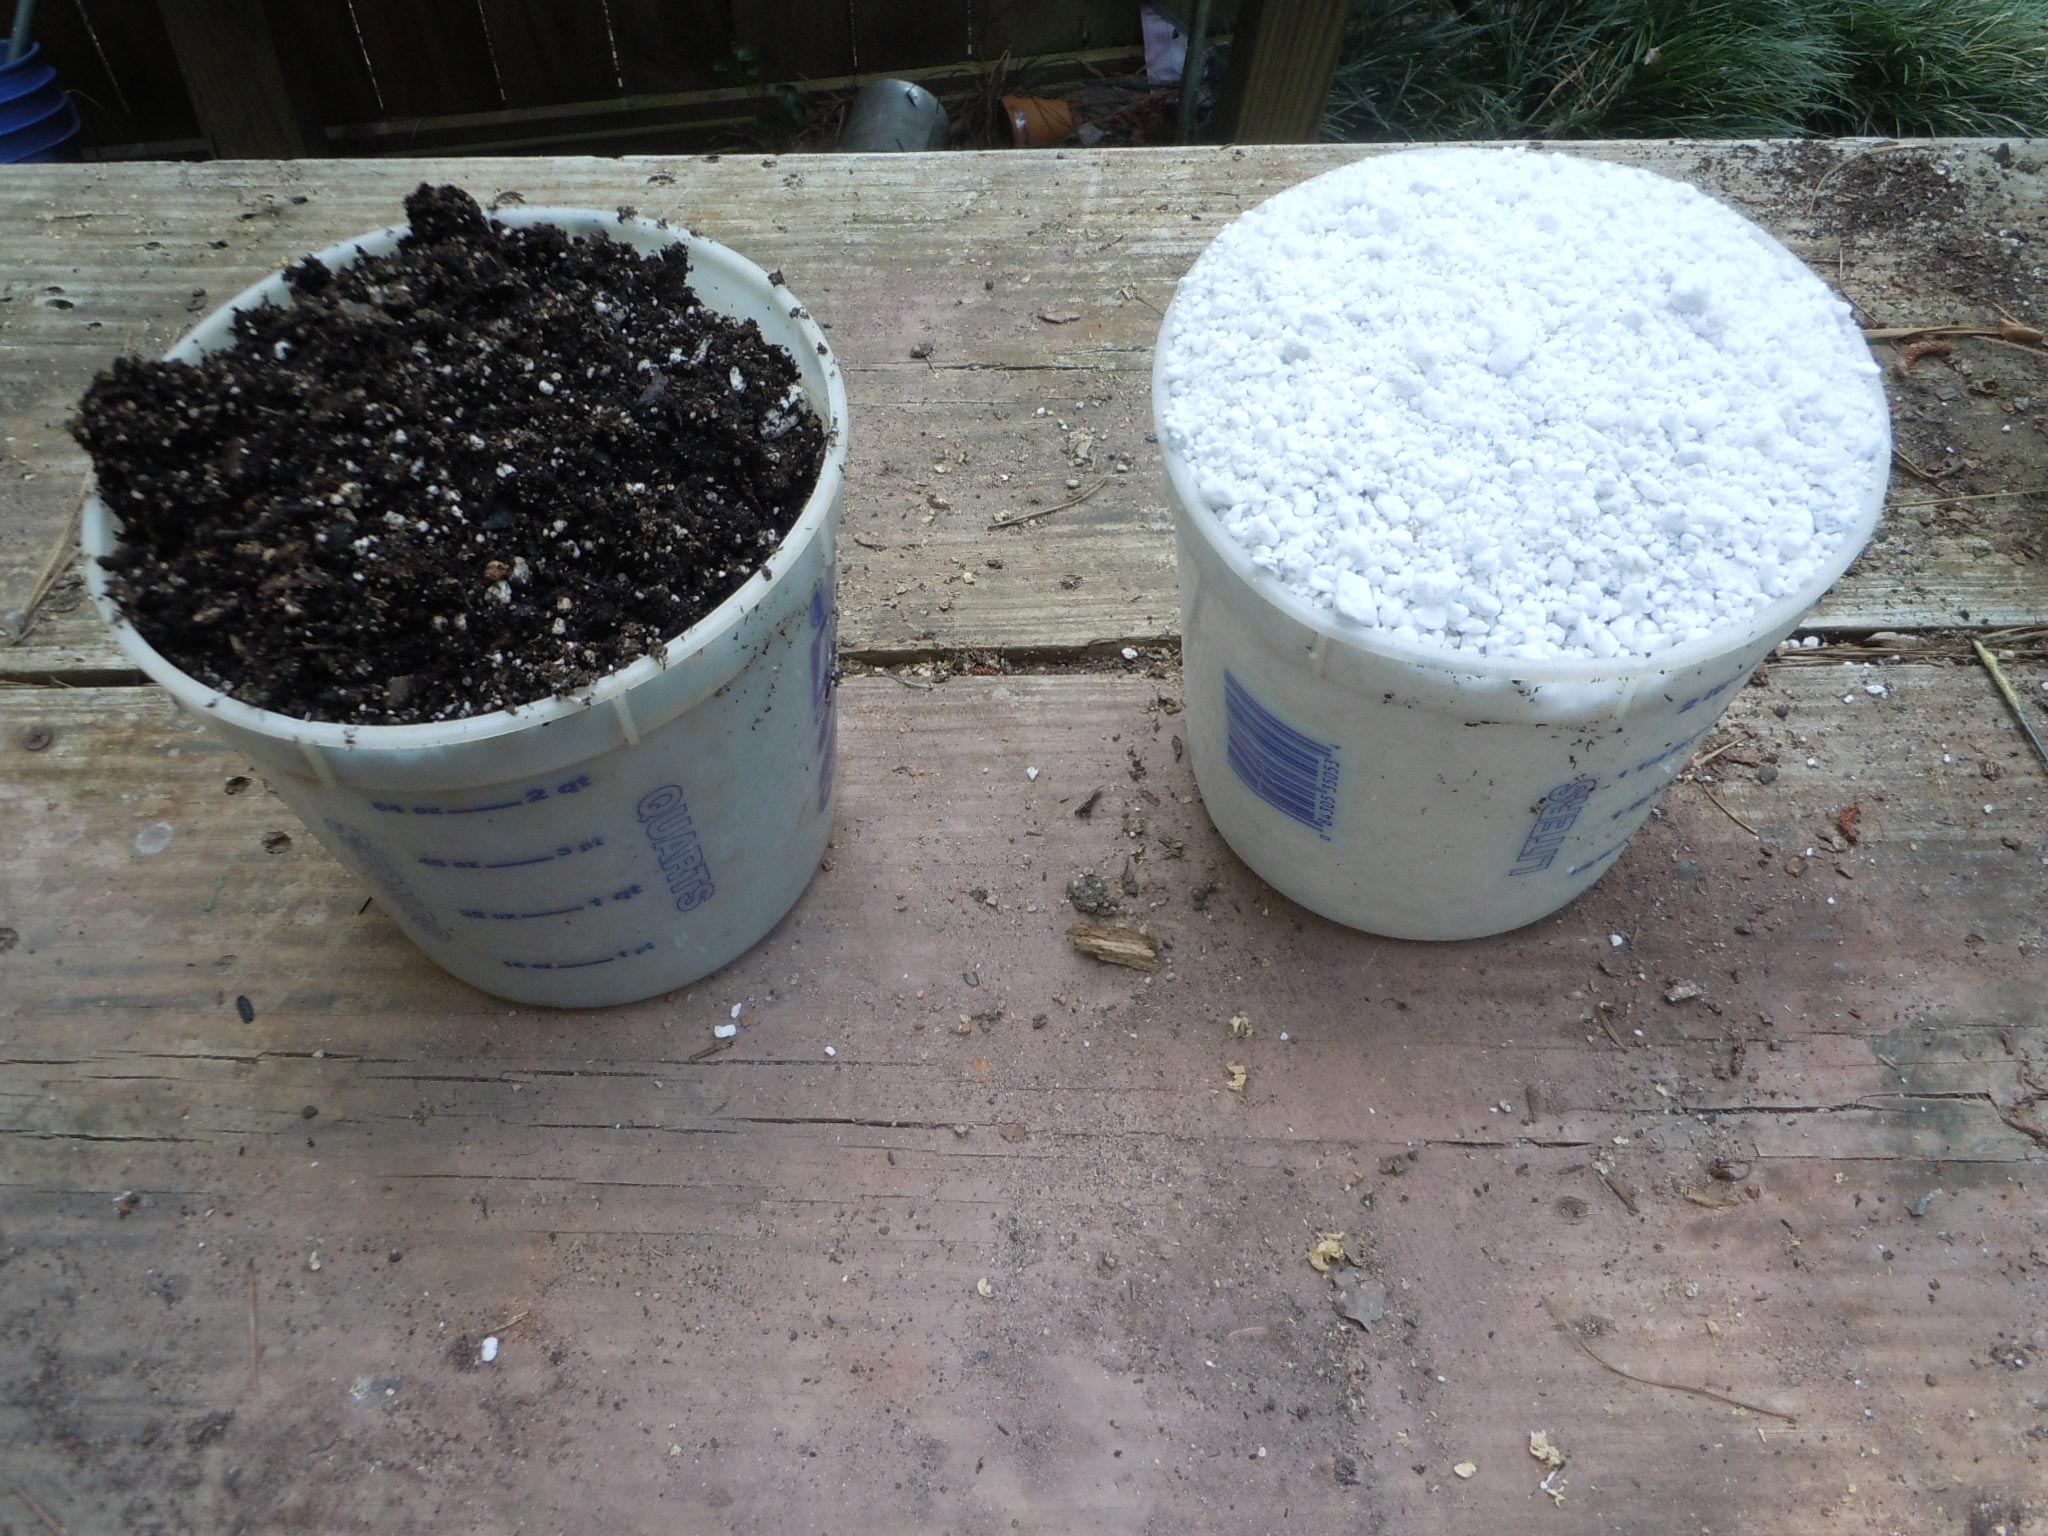 mix propagation media: 1 to 1 potting soil and perlite